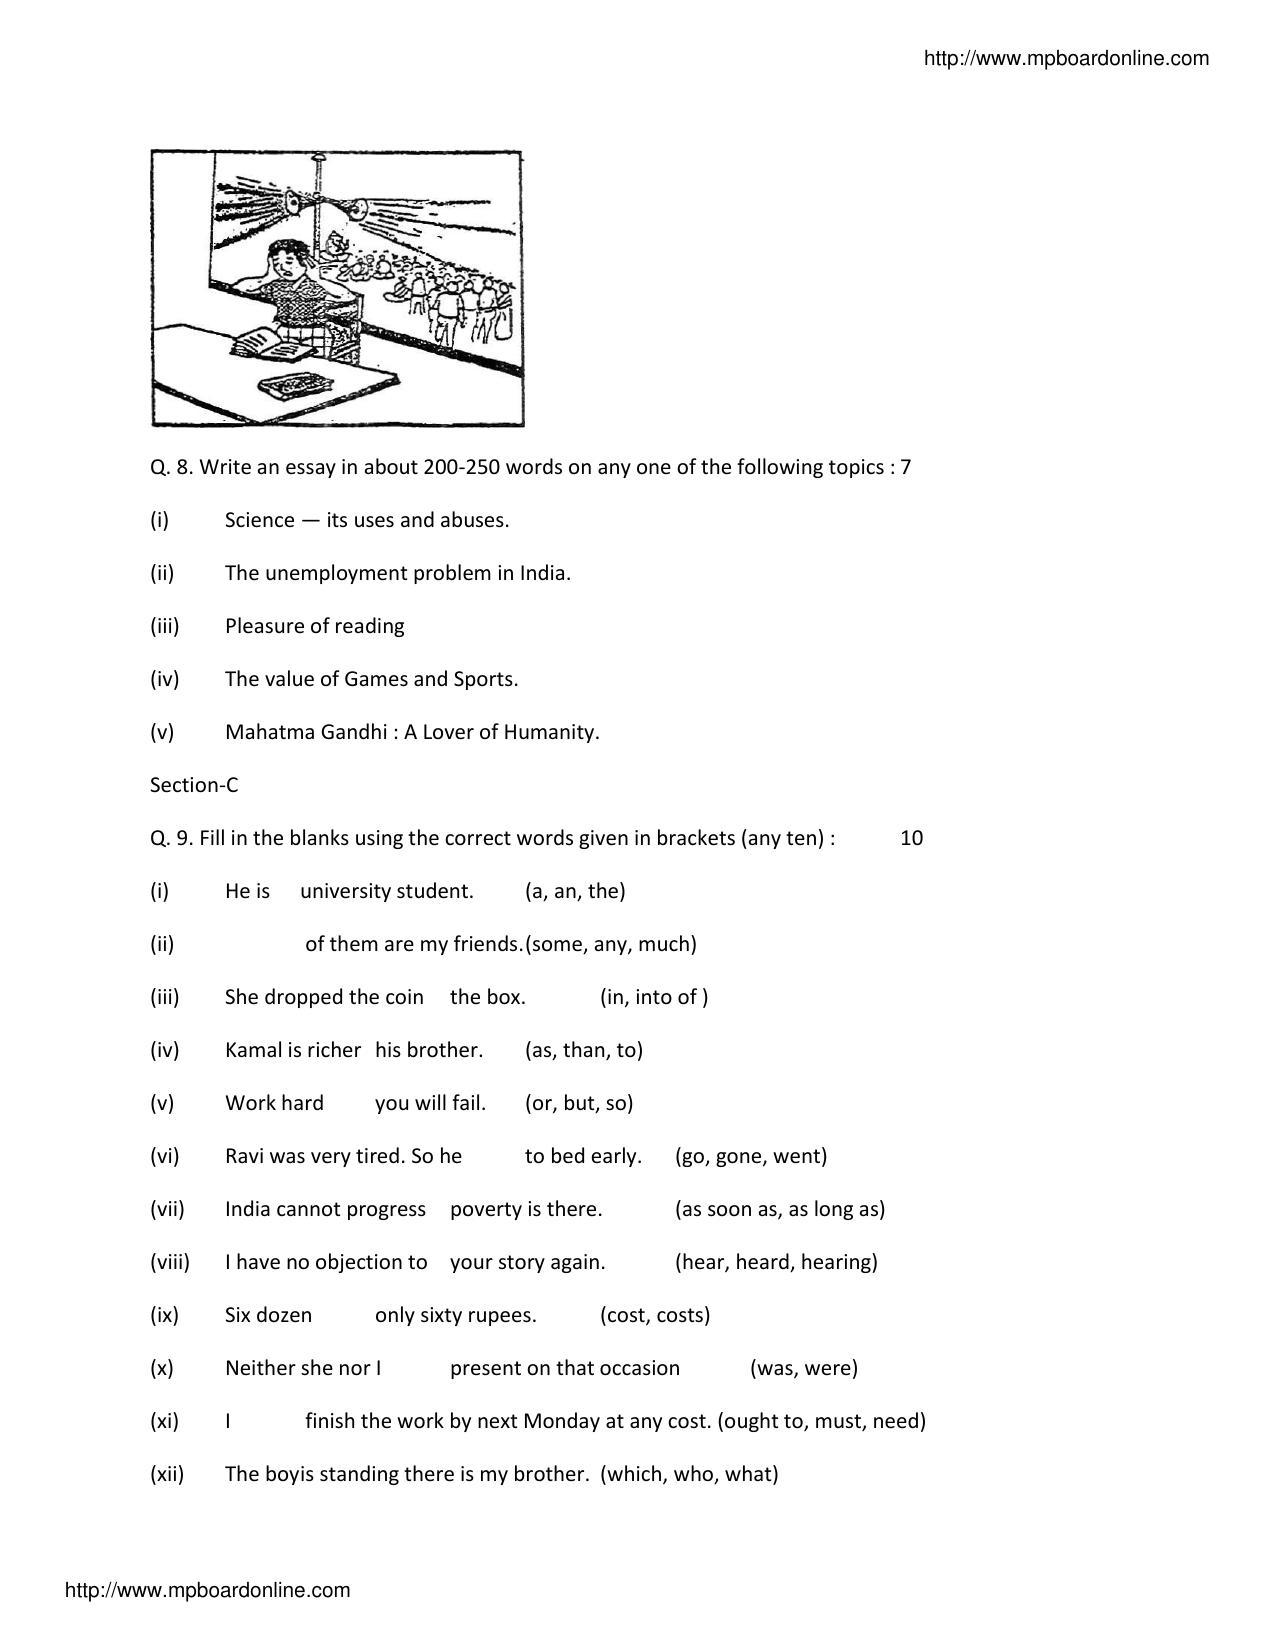 MP Board Class 10 English 2016 Question Paper - Page 5